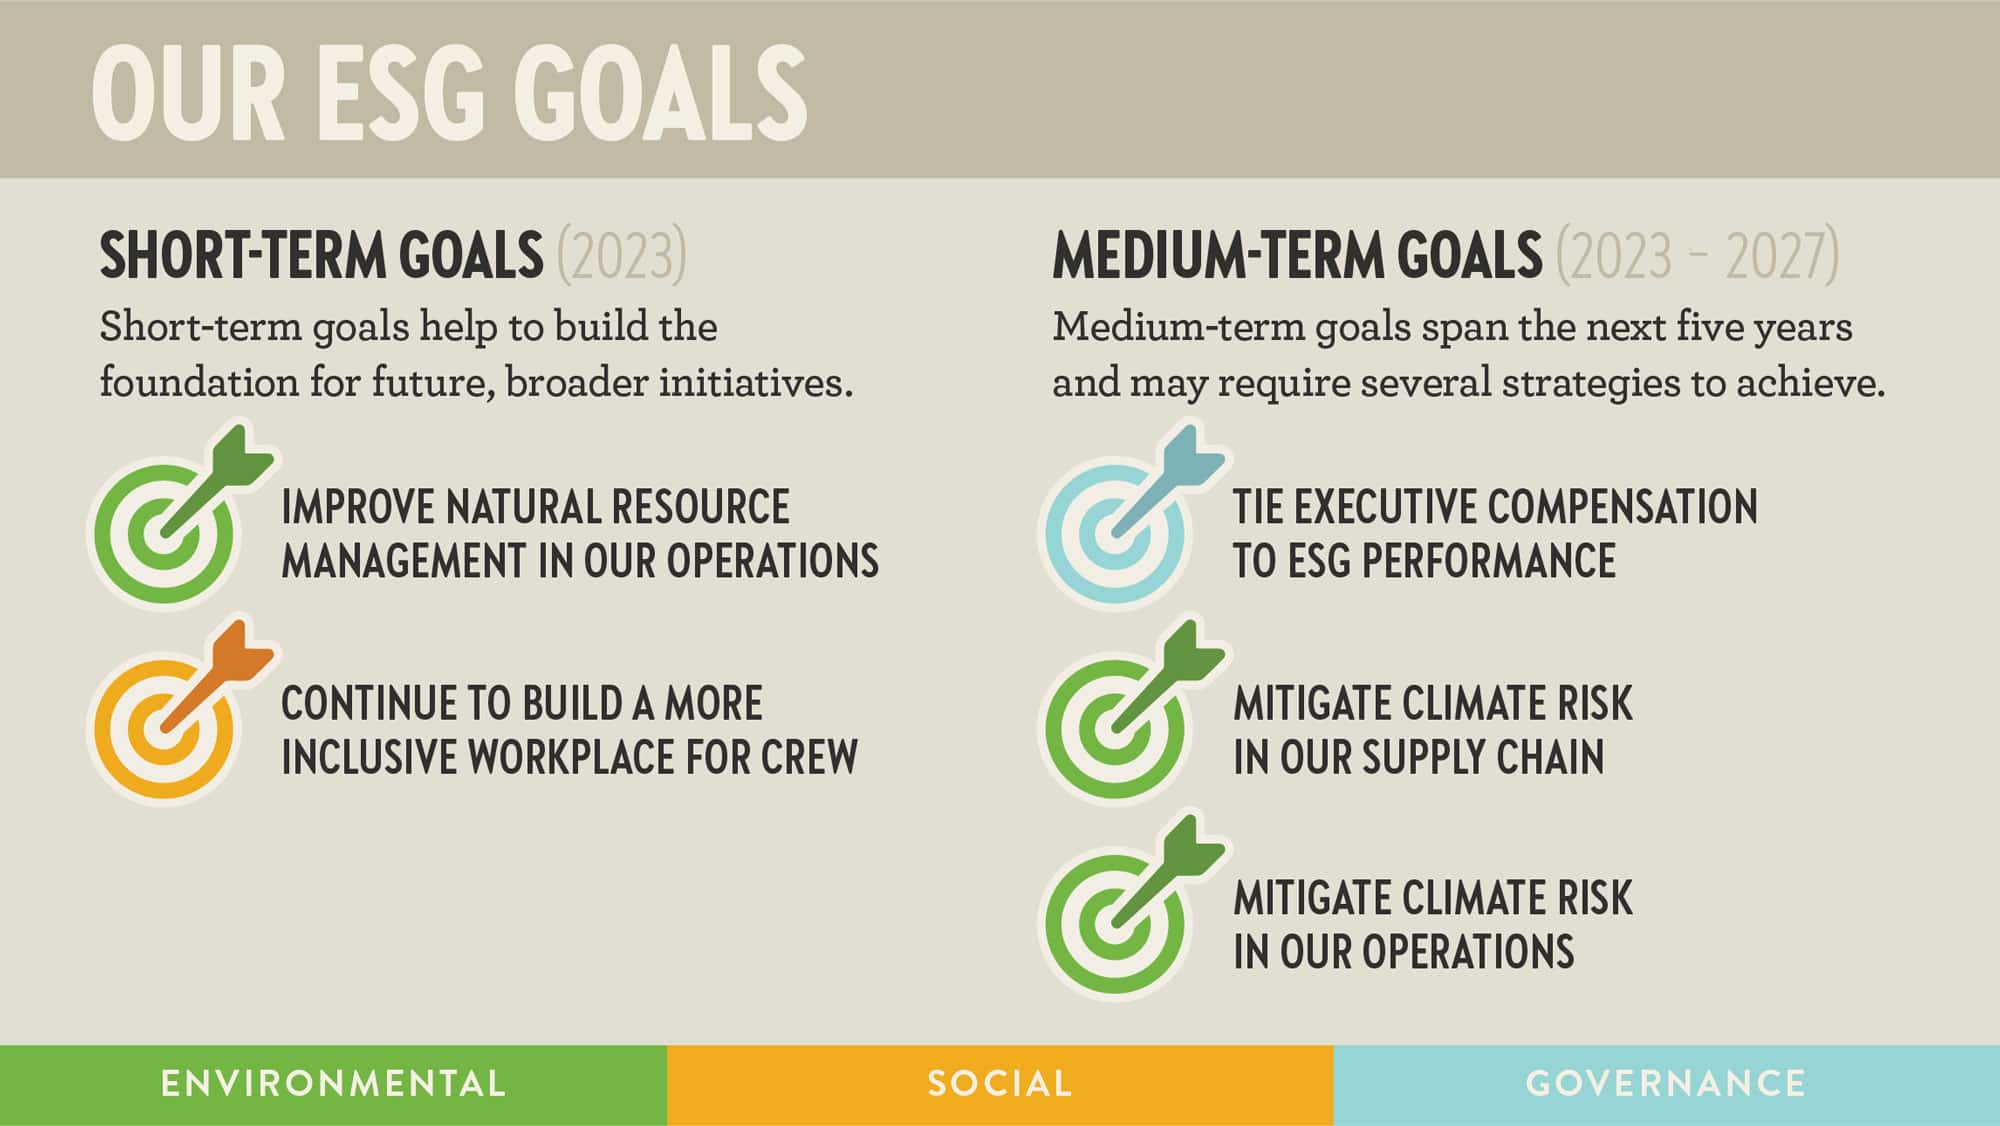 Our Environmental Social Governance goals Short-Term goals (2023) Short-term goals help to build the foundation for future, broader initiatives. Improve natural resource management in our operations Continue to build a more inclusive workplace for crew Medium-Term goals (2023 – 2027) Medium-term goals span the next five years and may require several strategies to achieve. Tie executive compensation to ESG performance Mitigate climate risk in our supply chain Mitigate climate risk in our operations